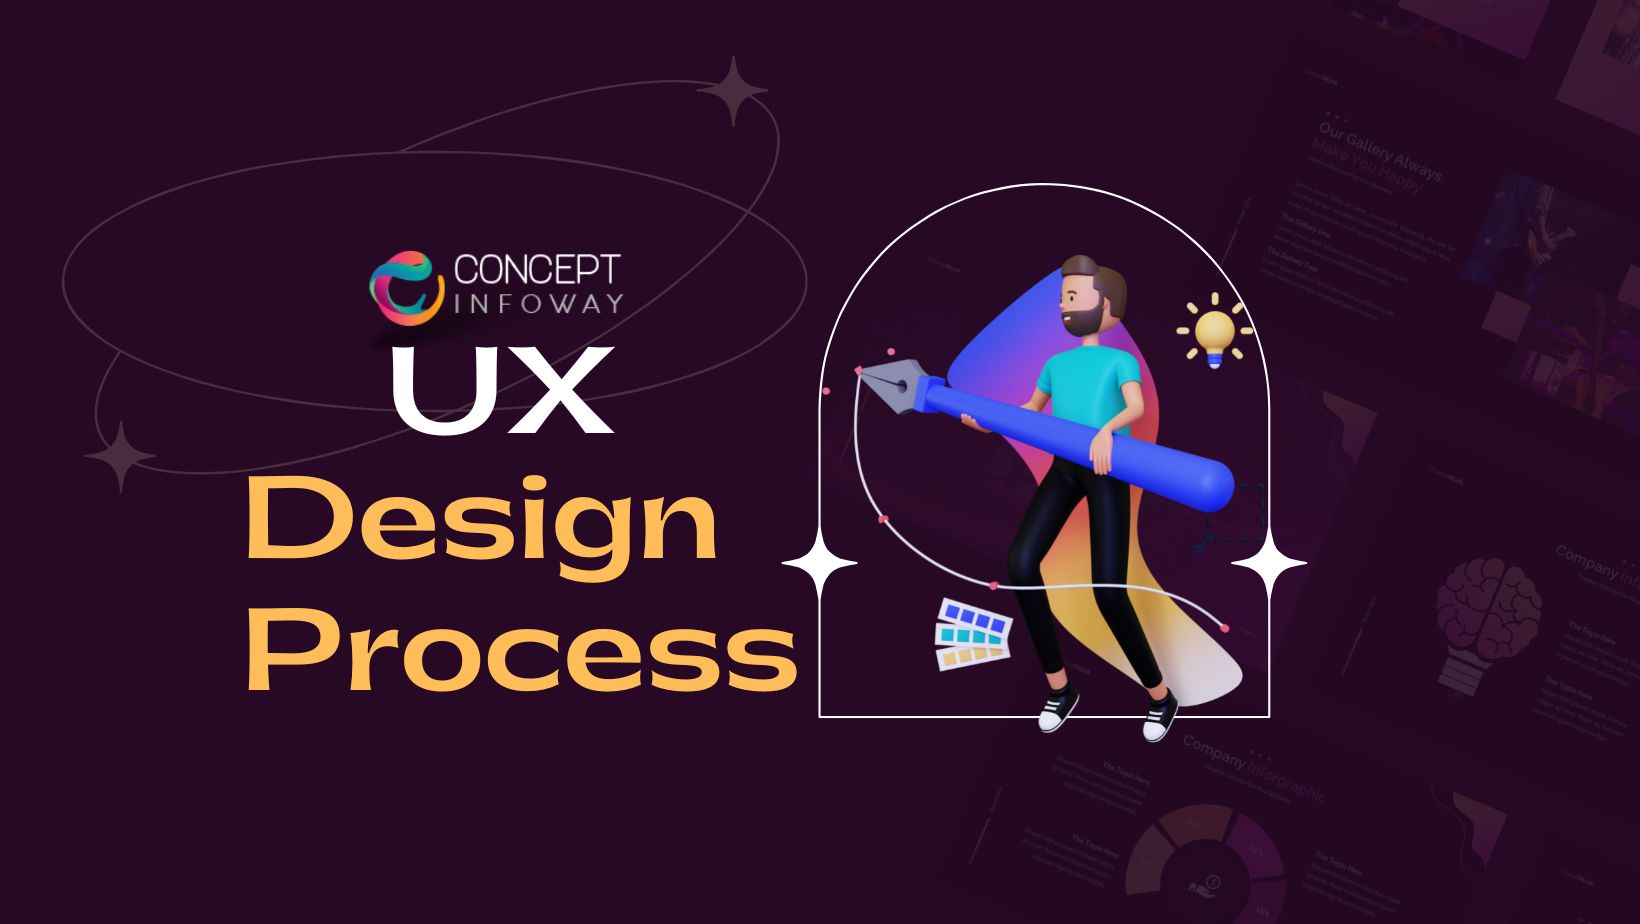 The UX Design Process: A Step-by-Step Guide to Creating User-Centered Websites